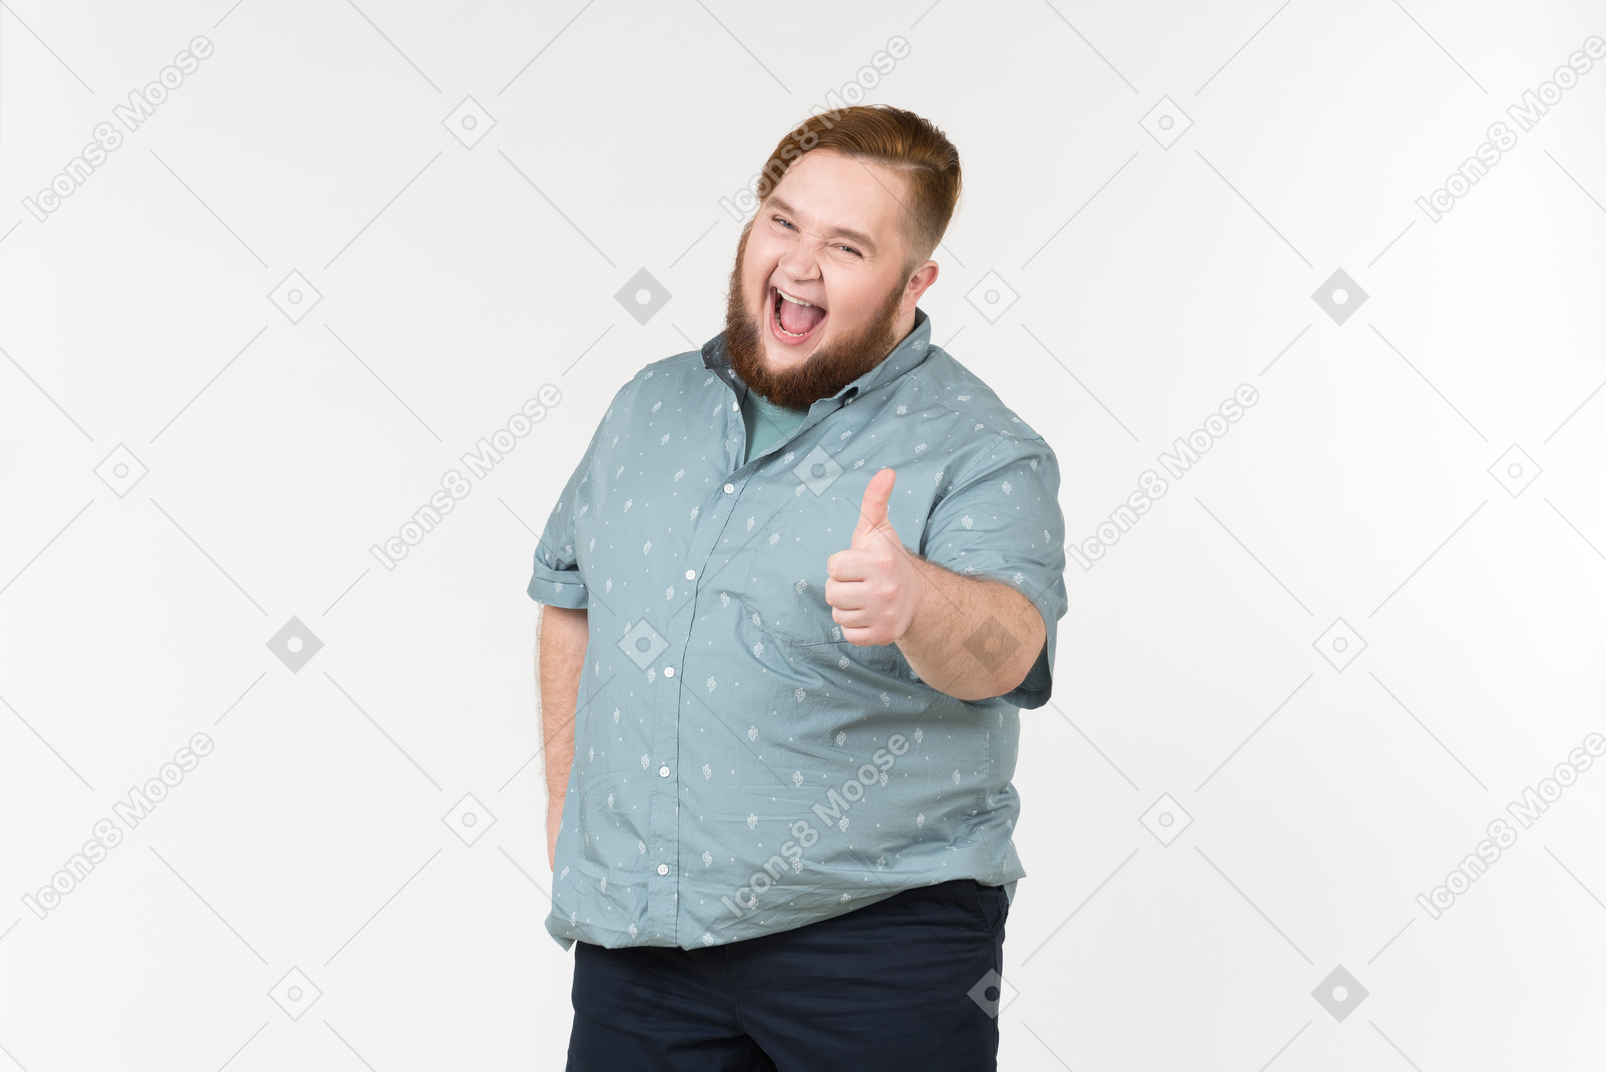 Excited young overweight man showing thumbs up